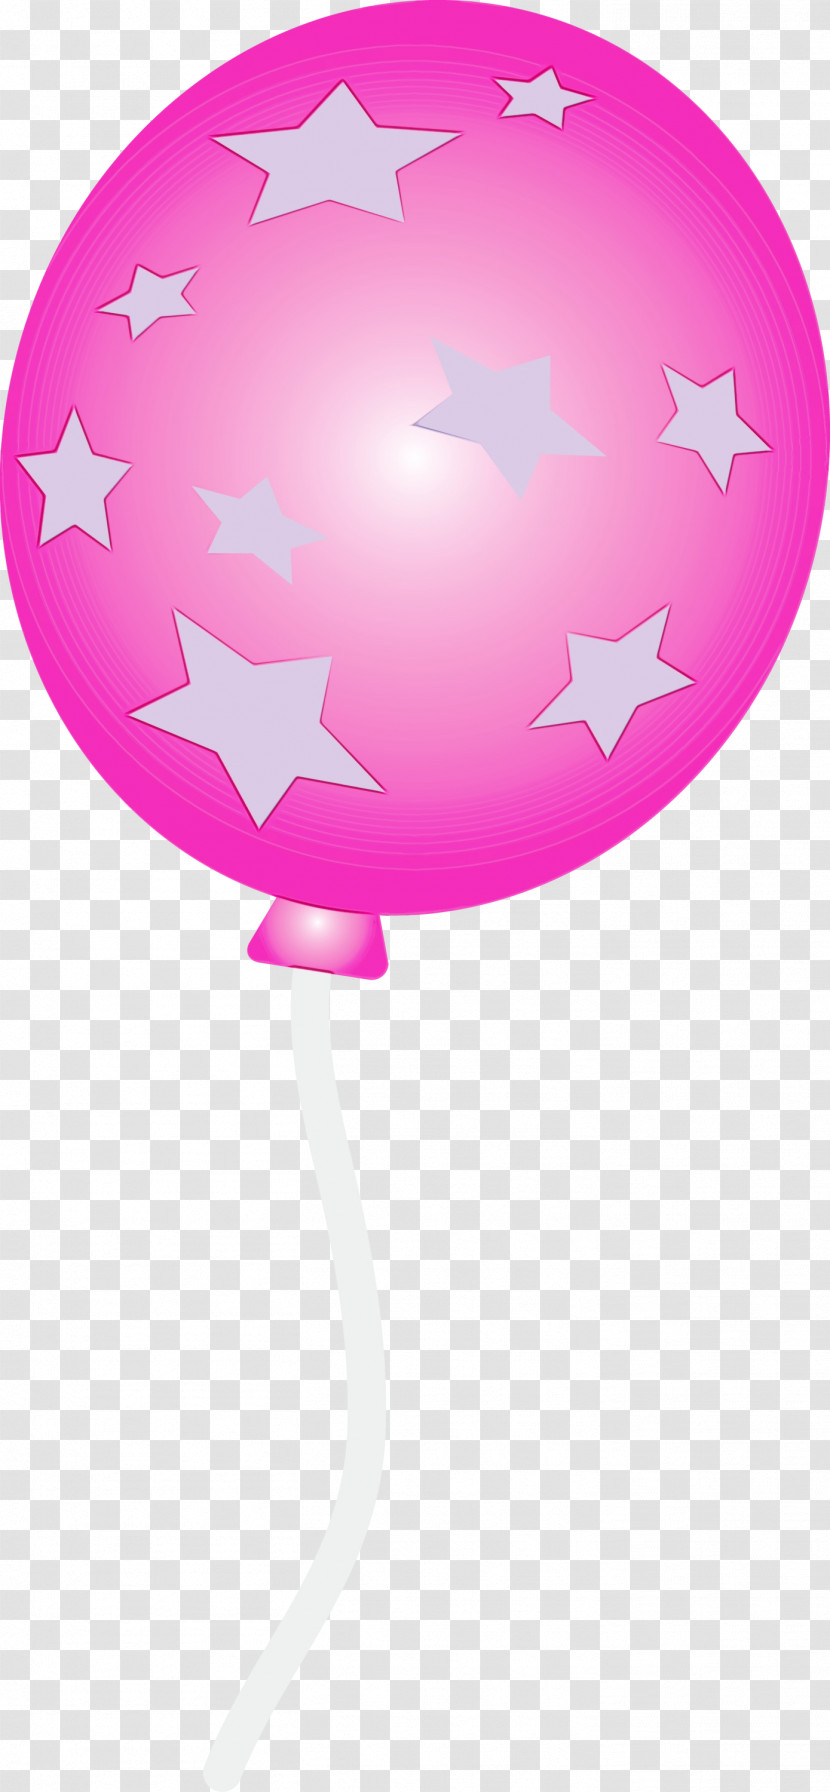 Balloon Pink Magenta Party Supply Transparent PNG